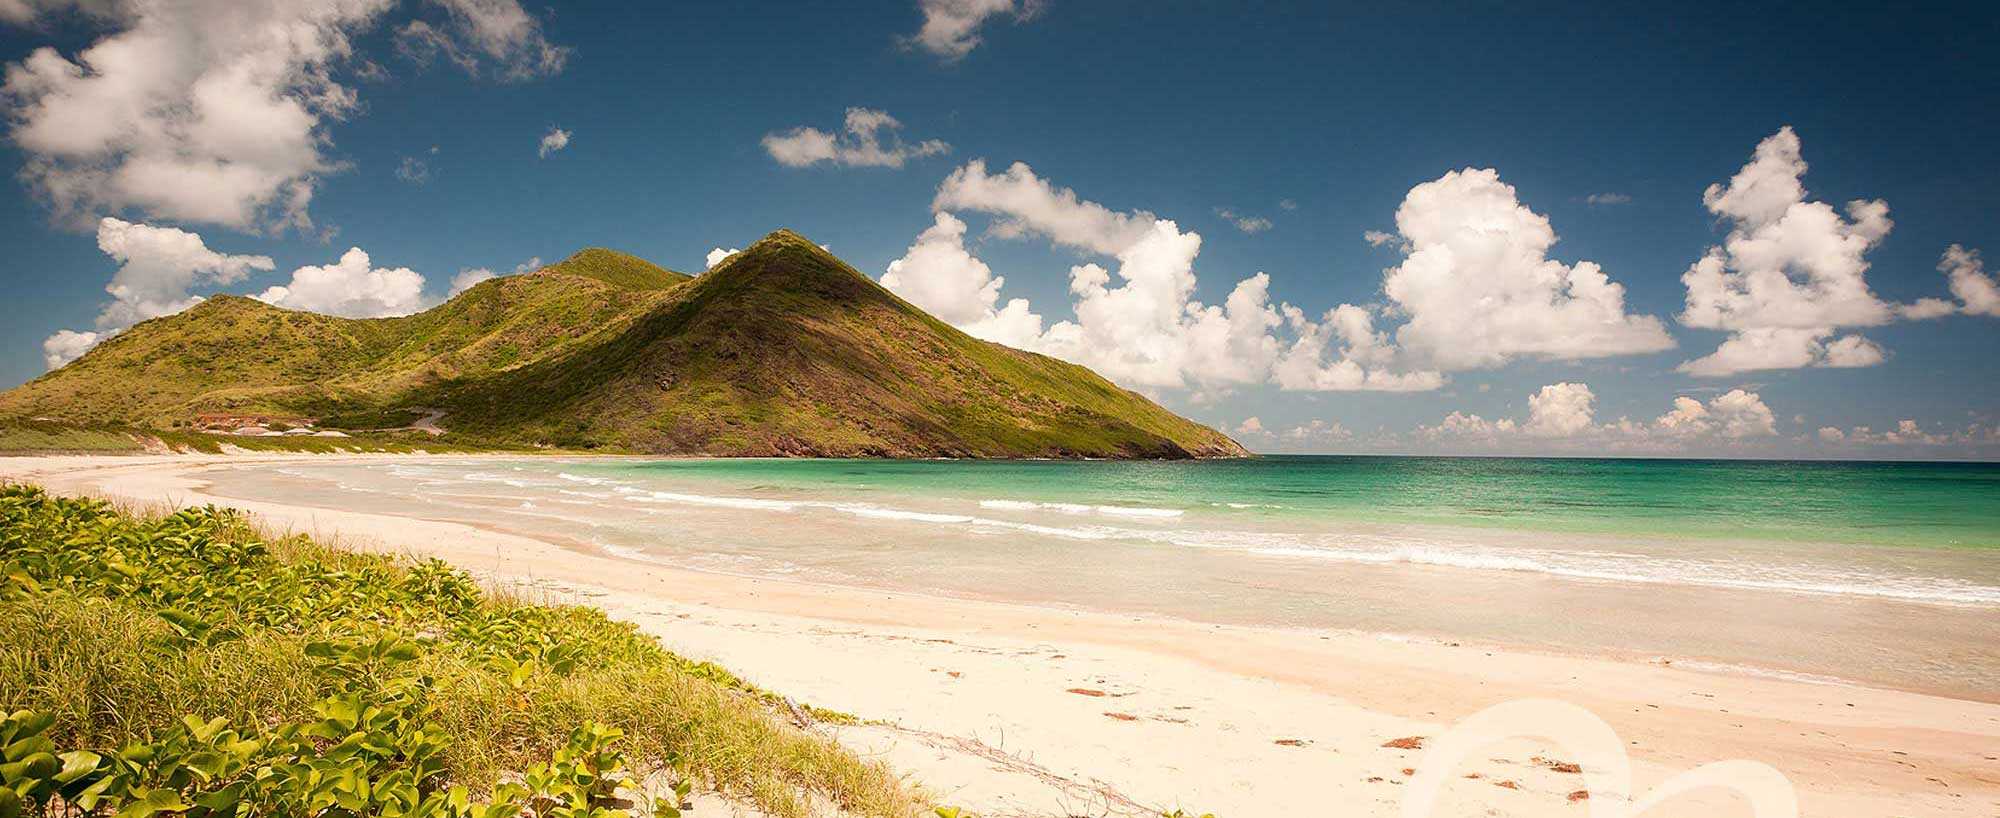 St. Kitts and Nevis Citizenship by Investment